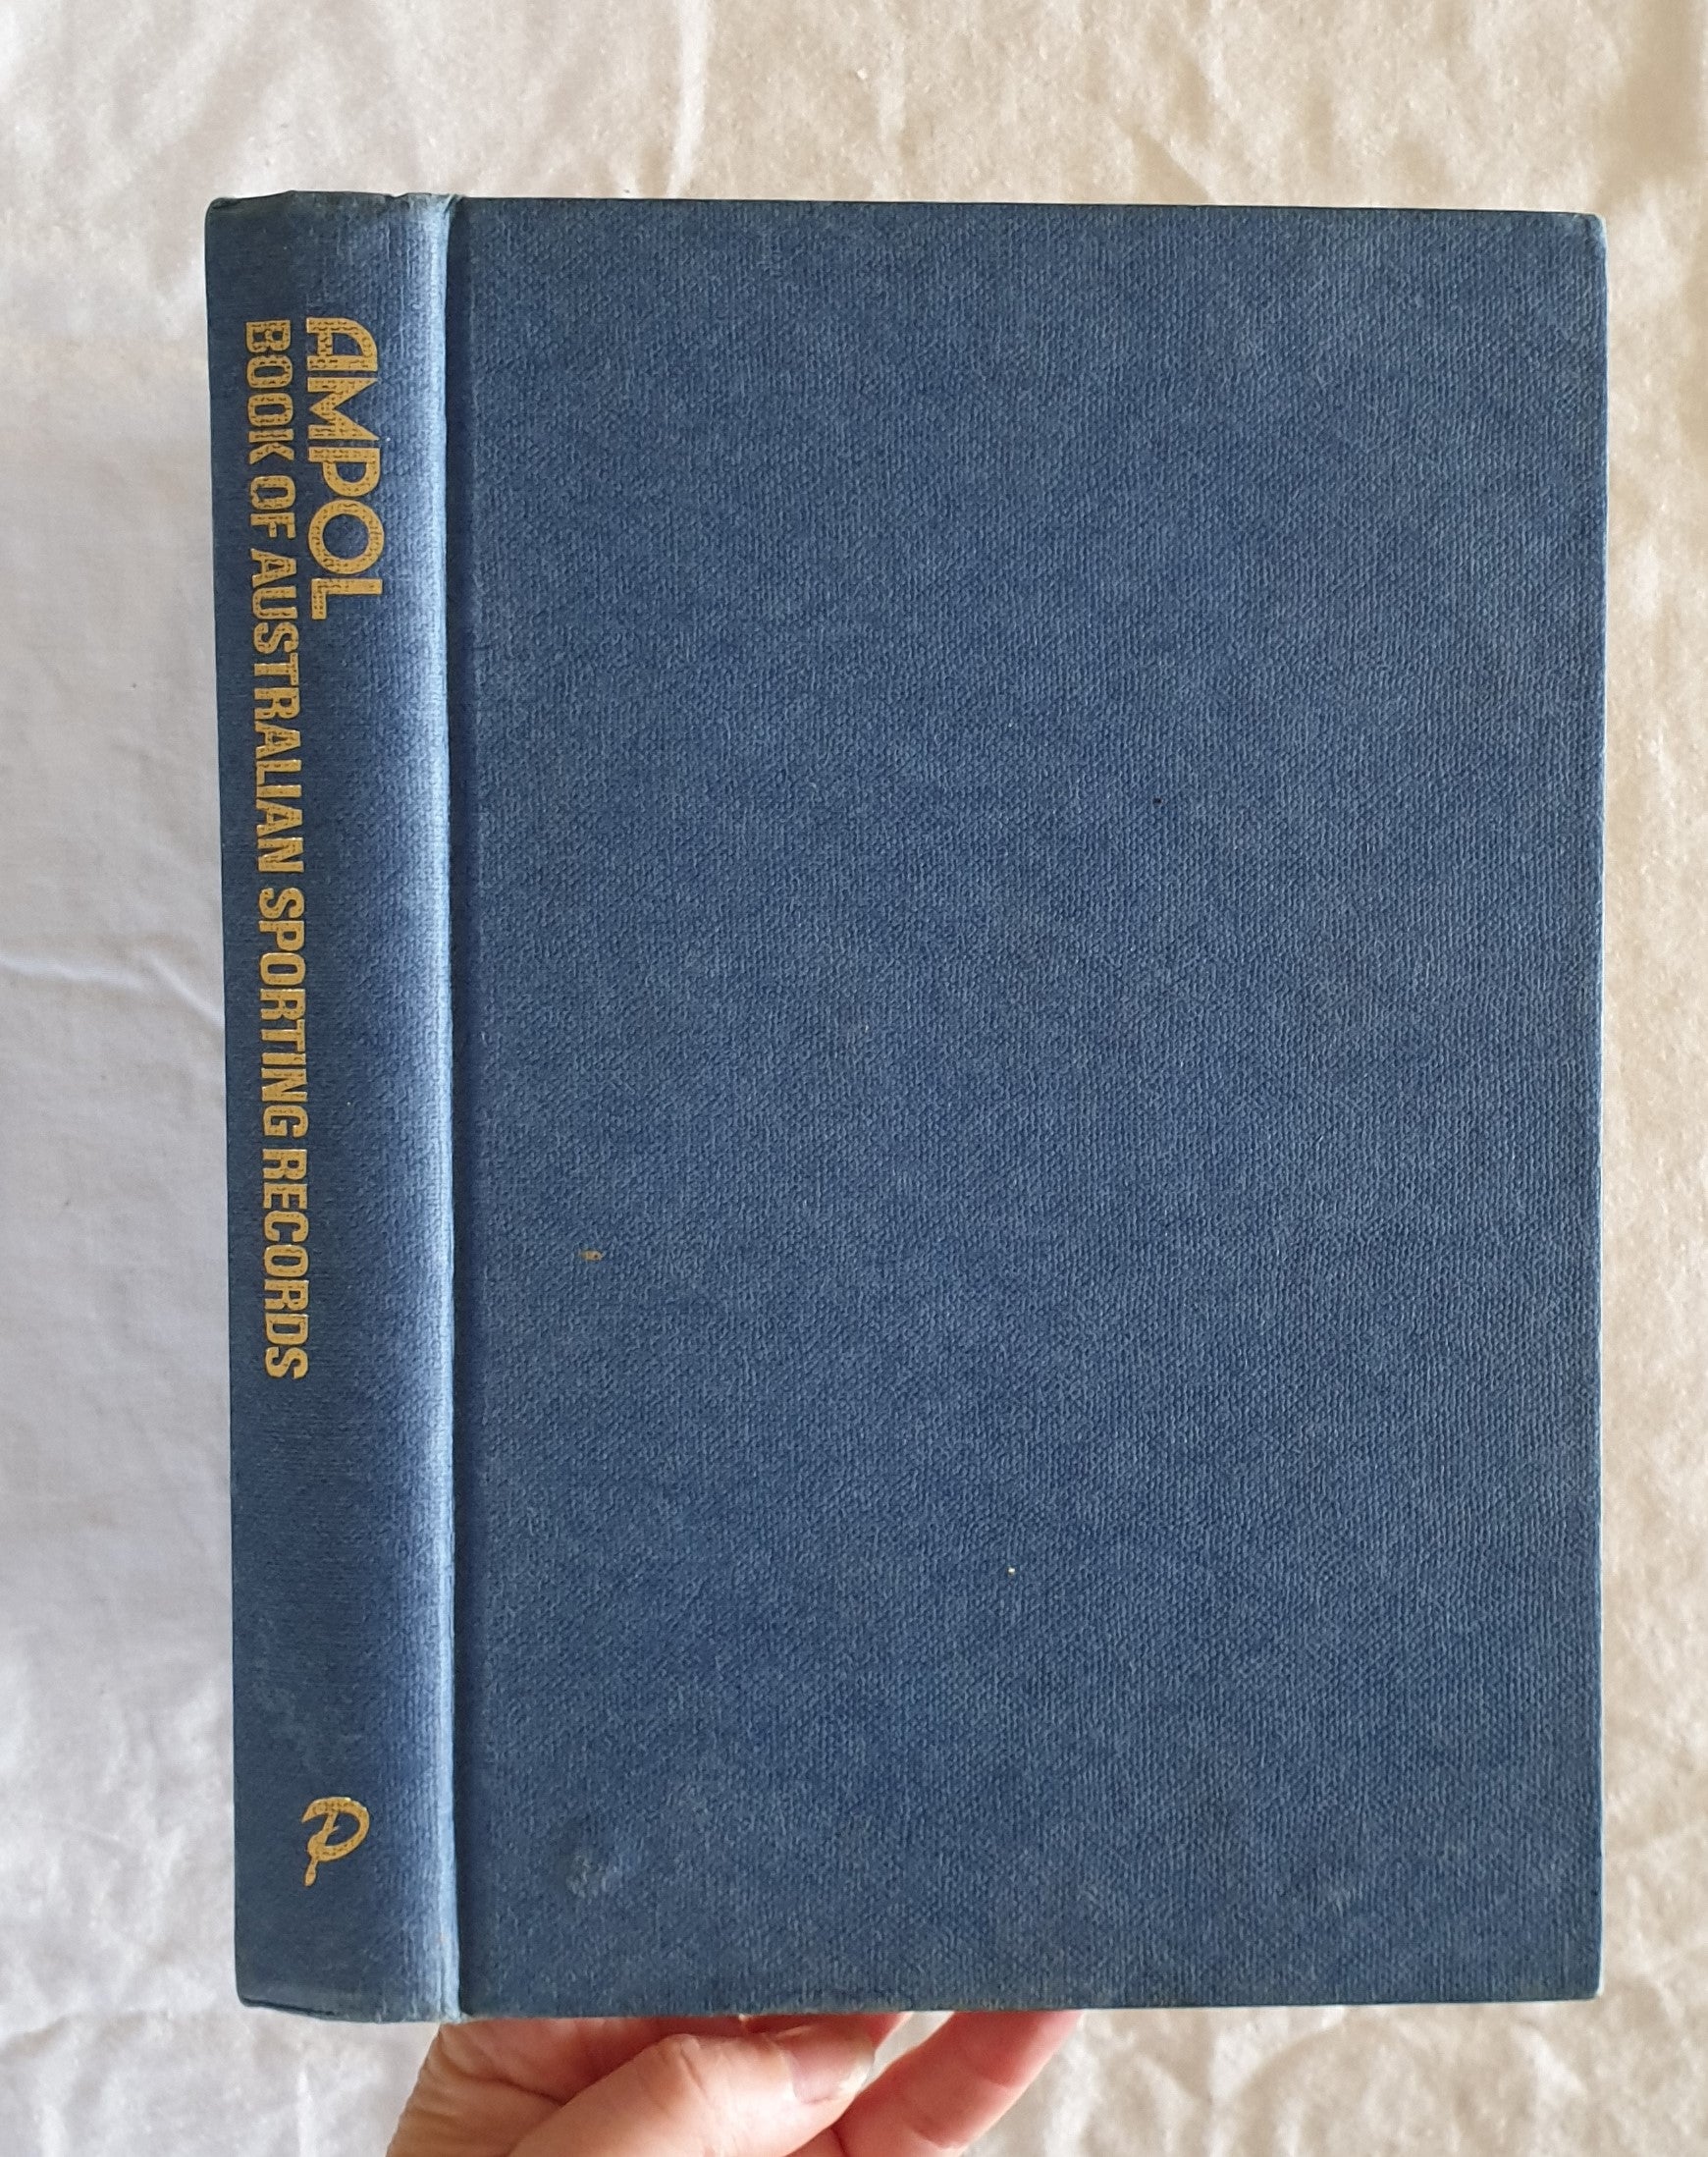 The Ampol Book of Australian Sporting Records by Jack Pollard